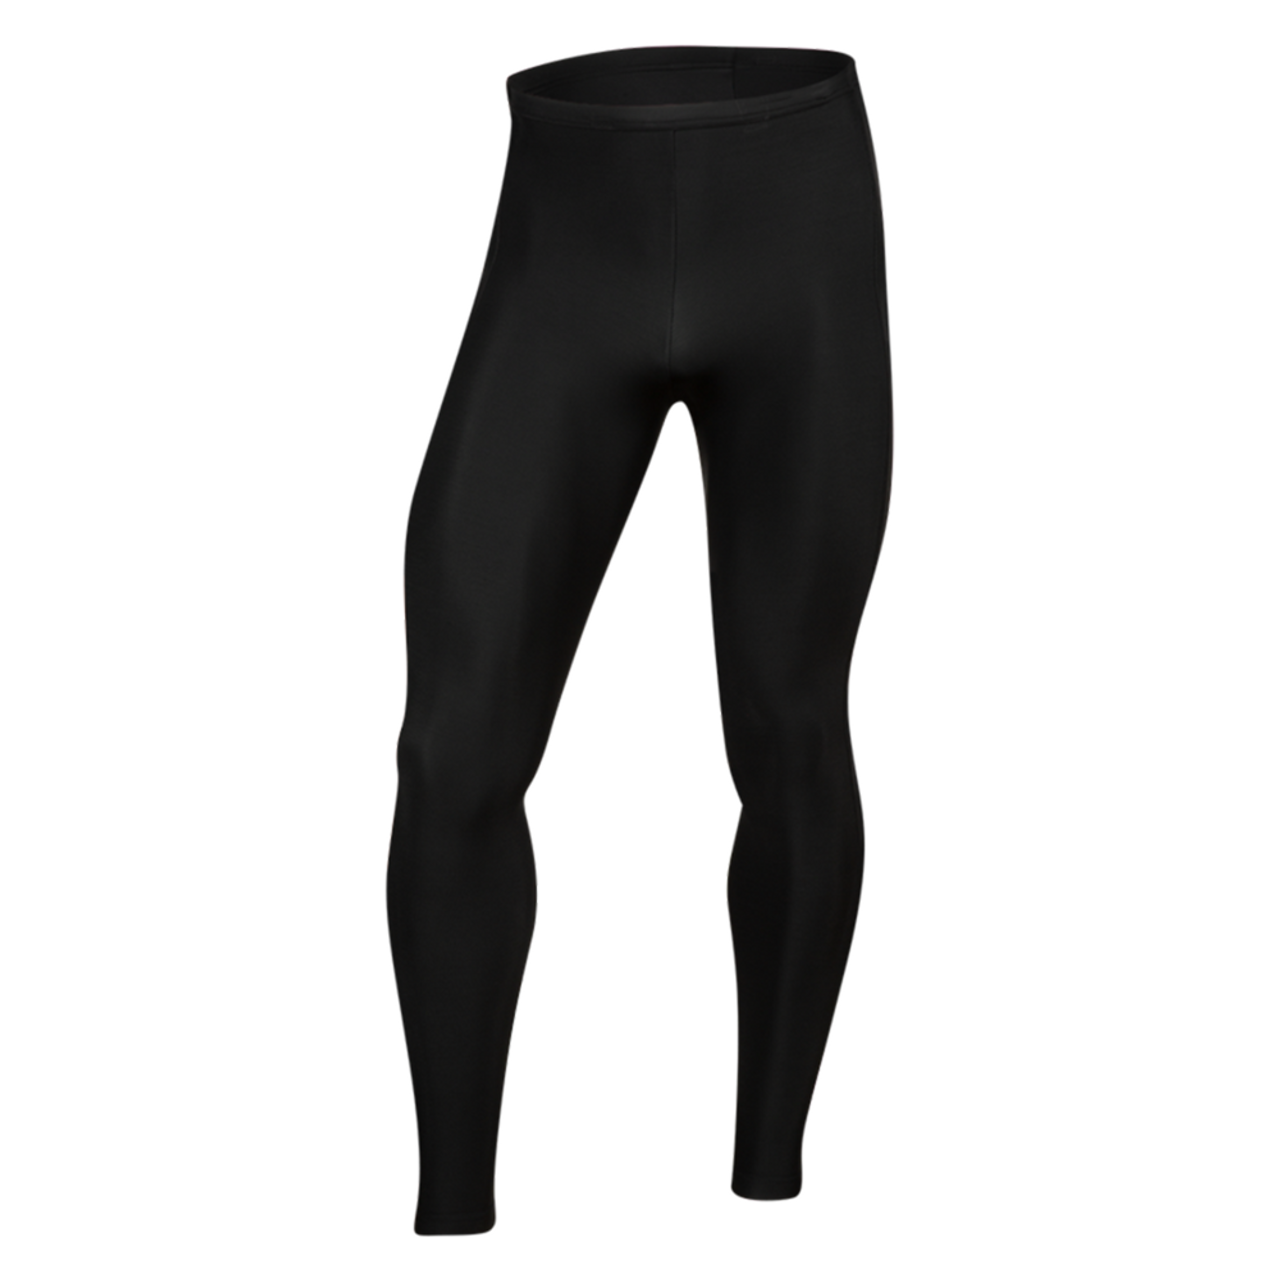 https://cdn11.bigcommerce.com/s-wduocnf/images/stencil/1280x1280/products/980/3149/pearl-izumi-thermal-tights-men-front__99395.1636669118.png?c=2